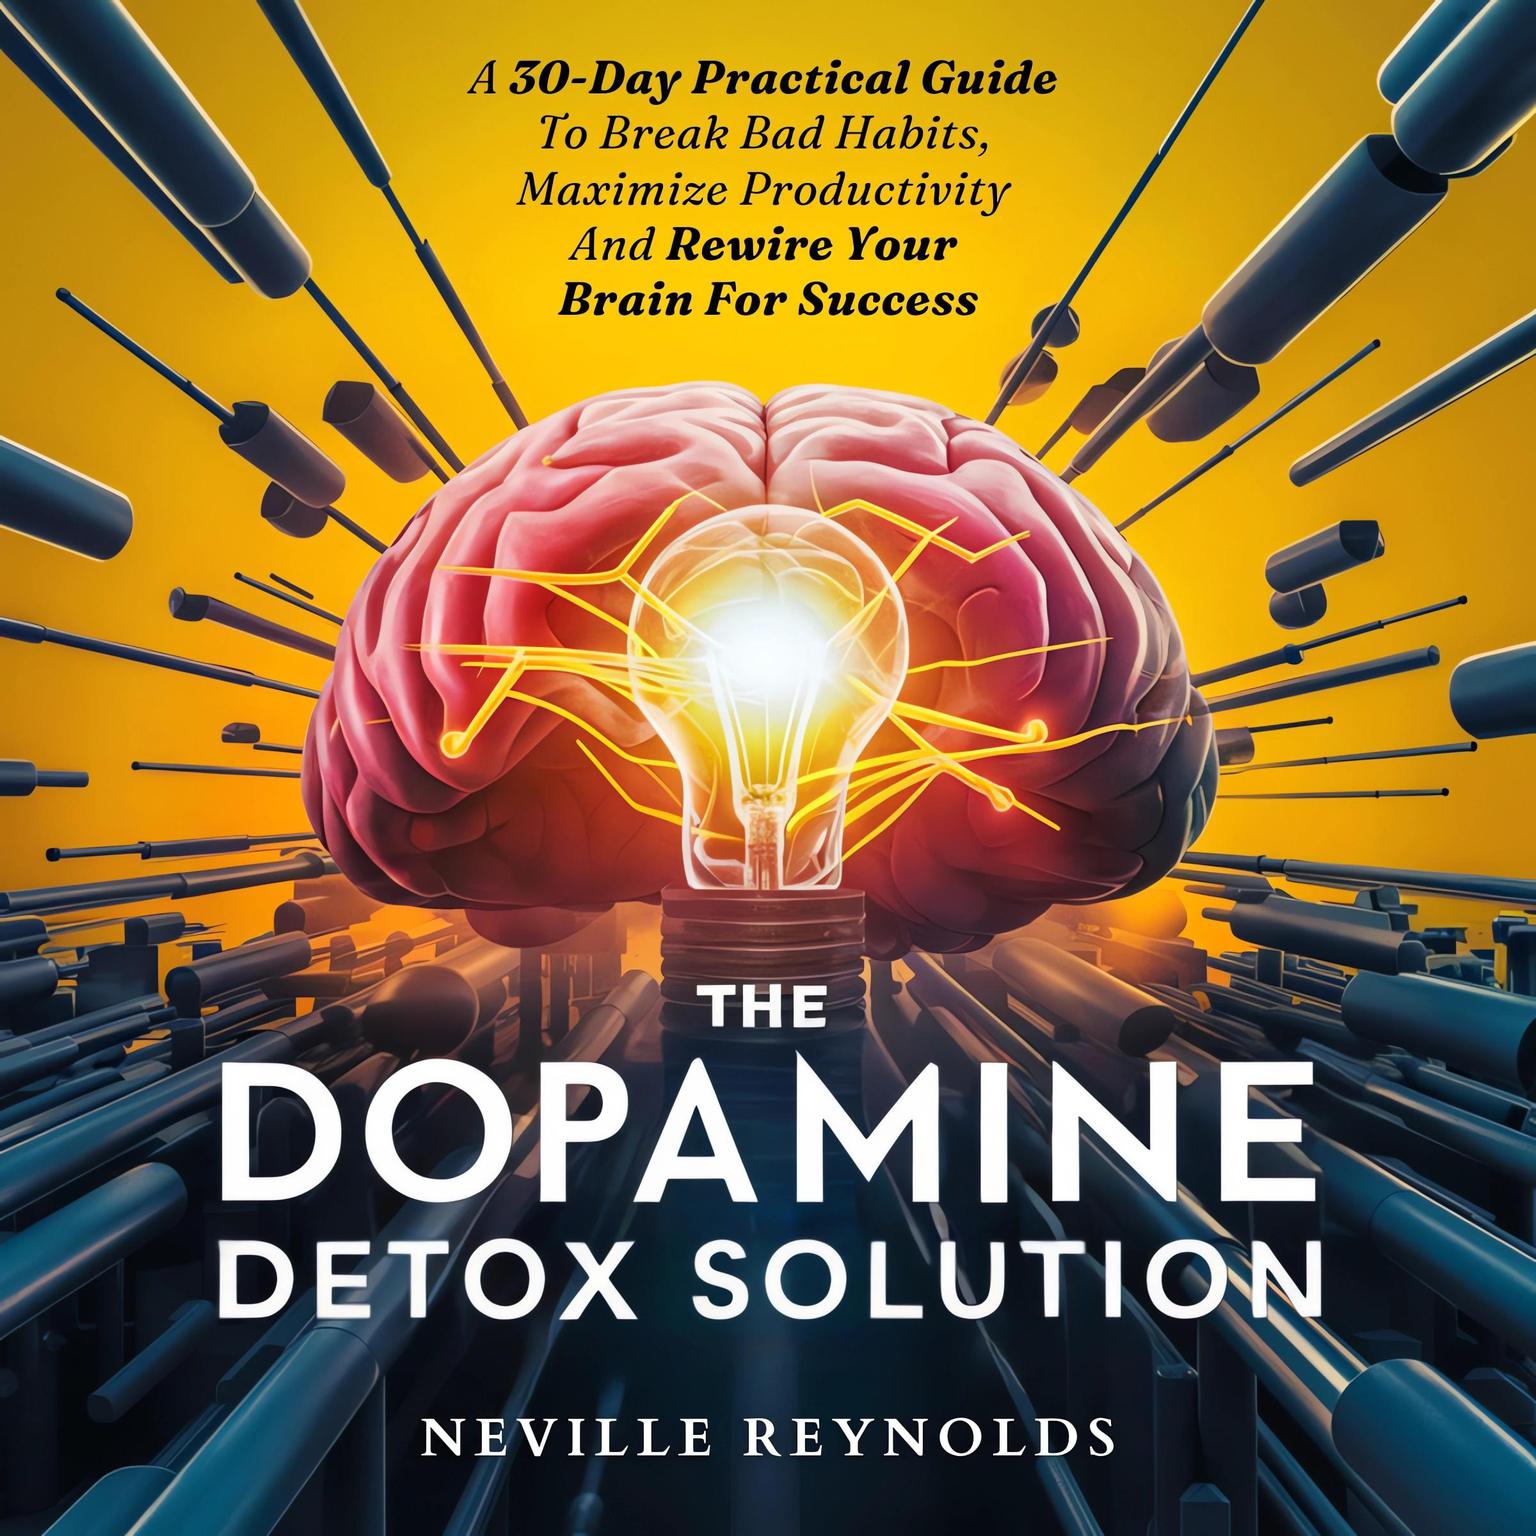 The Dopamine Detox Solution: A 30-Day Practical Guide To Break Bad Habits, Maximize Productivity And Rewire Your Brain For Success Audiobook, by Neville Reynolds